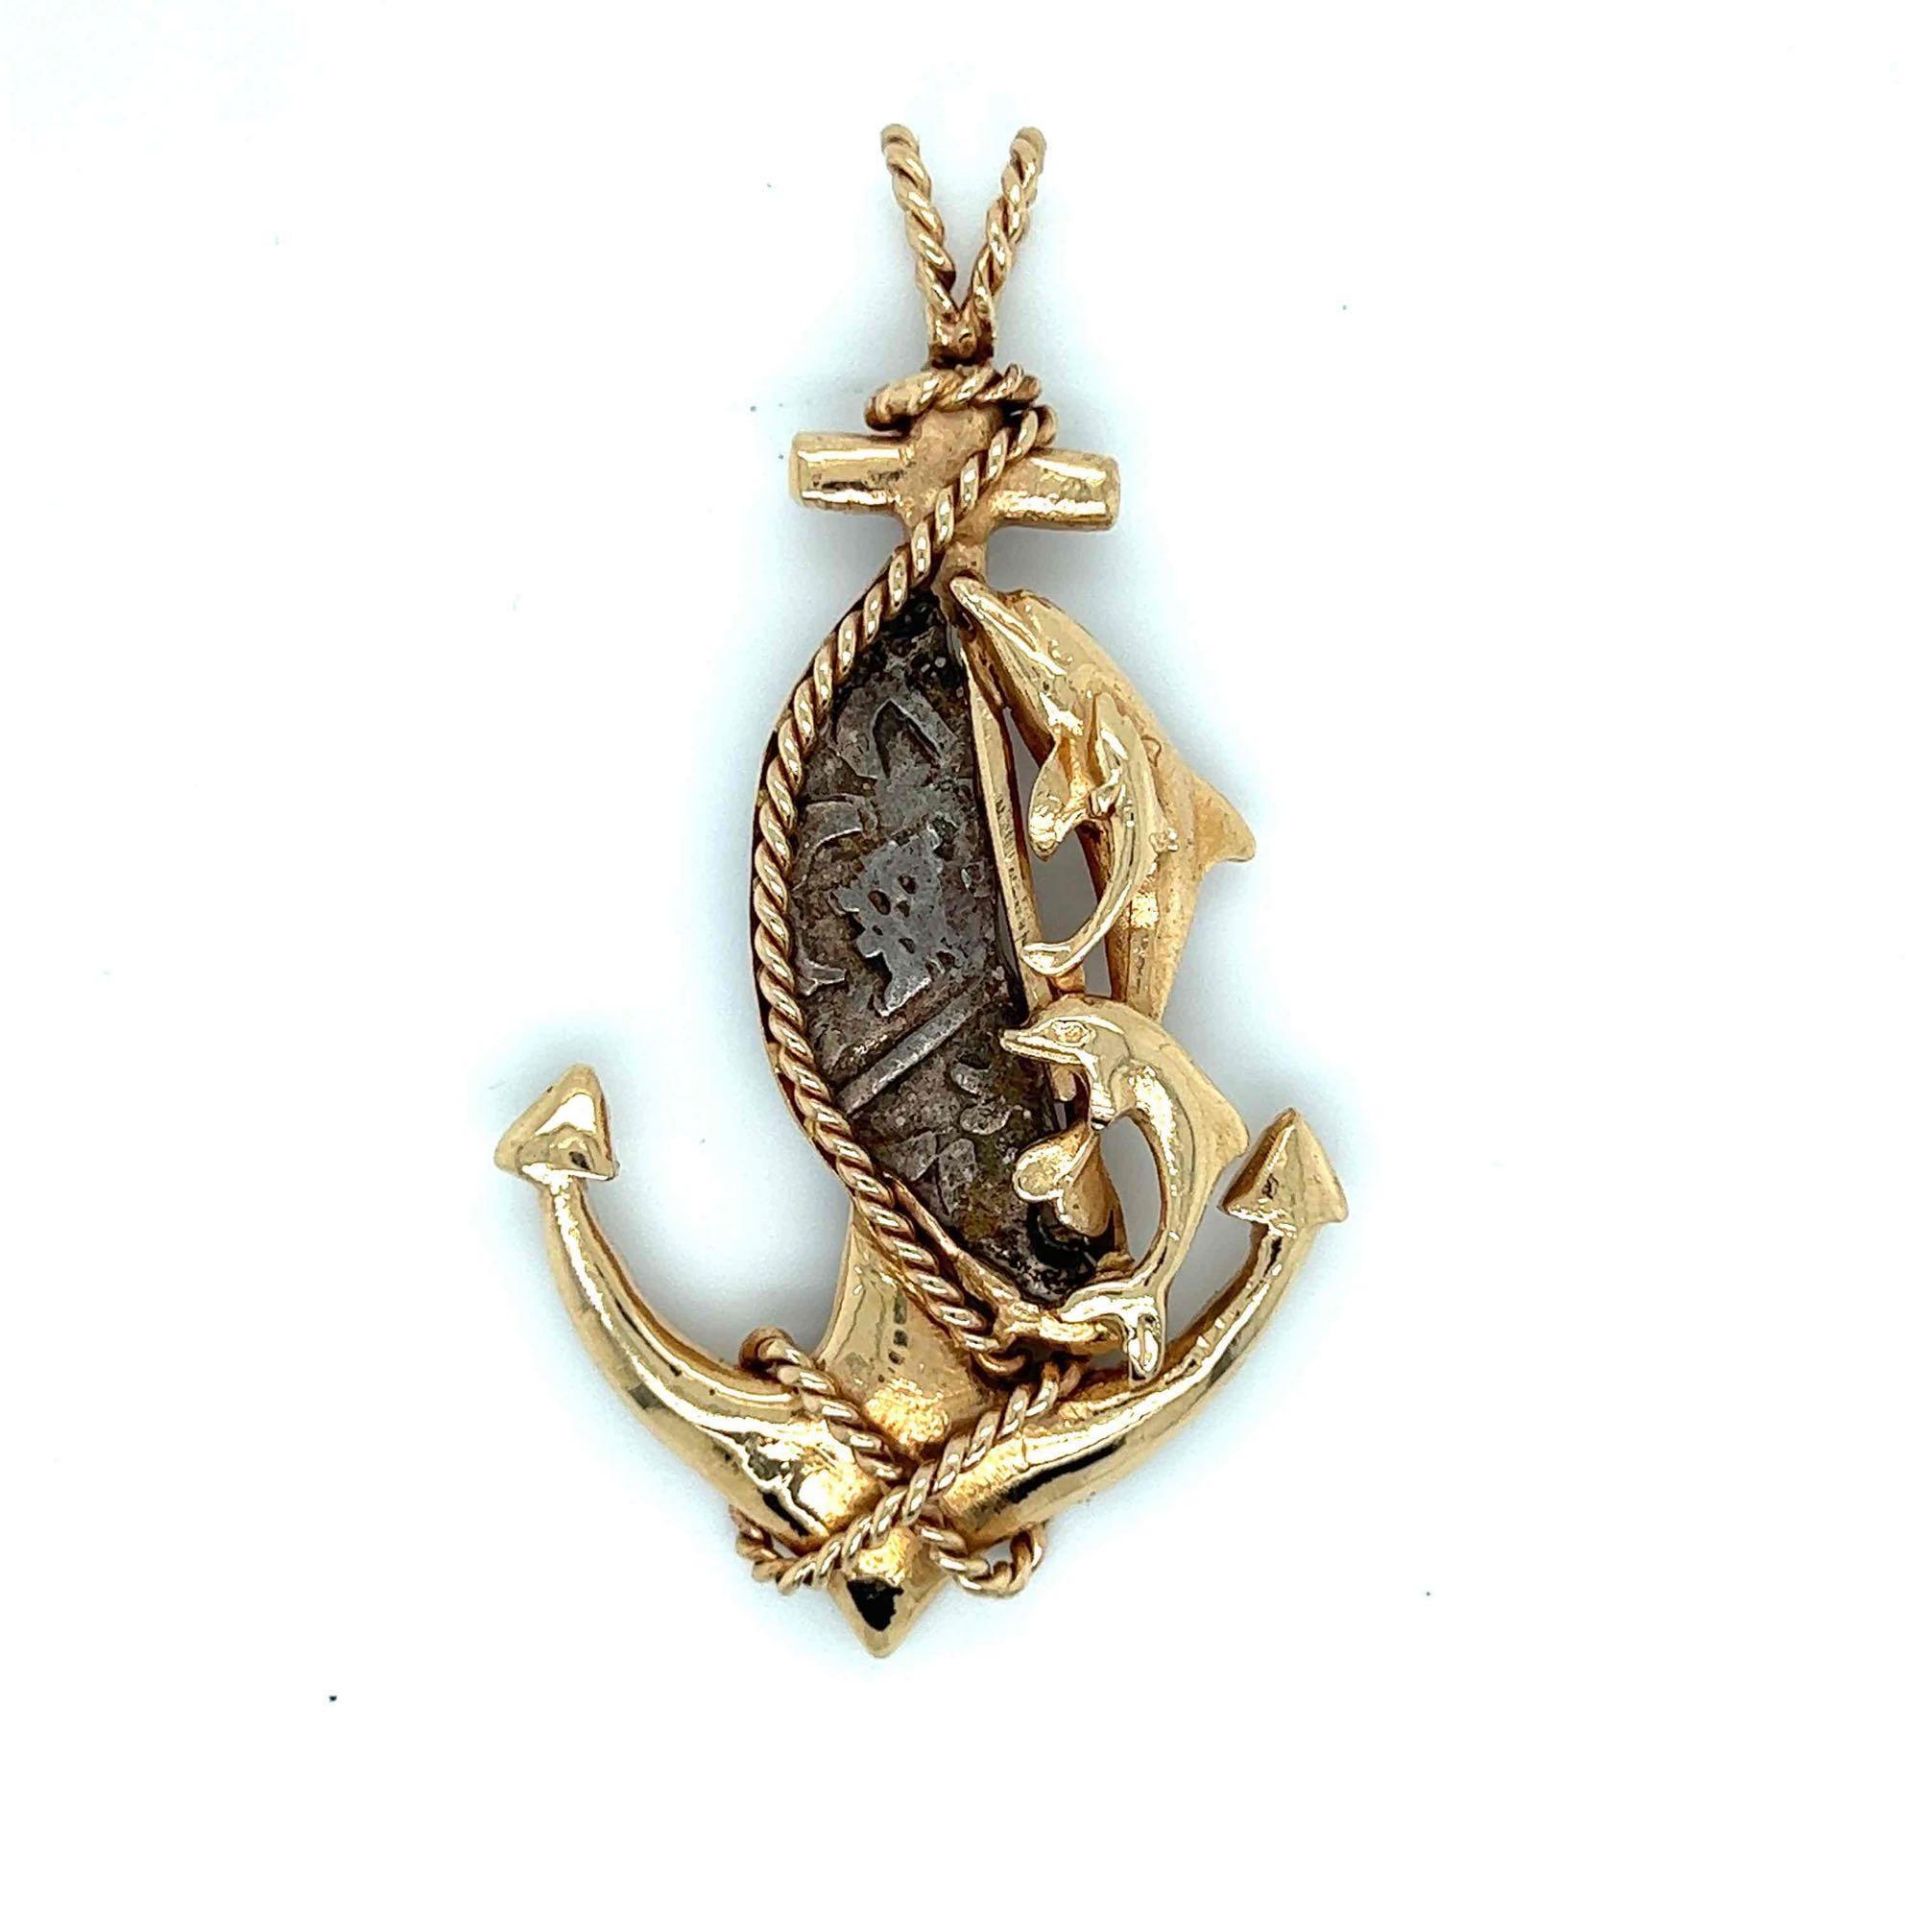 ESTATE 14K GOLD AND SILVER SHIPWRECK COIN PENDANT - Image 2 of 2